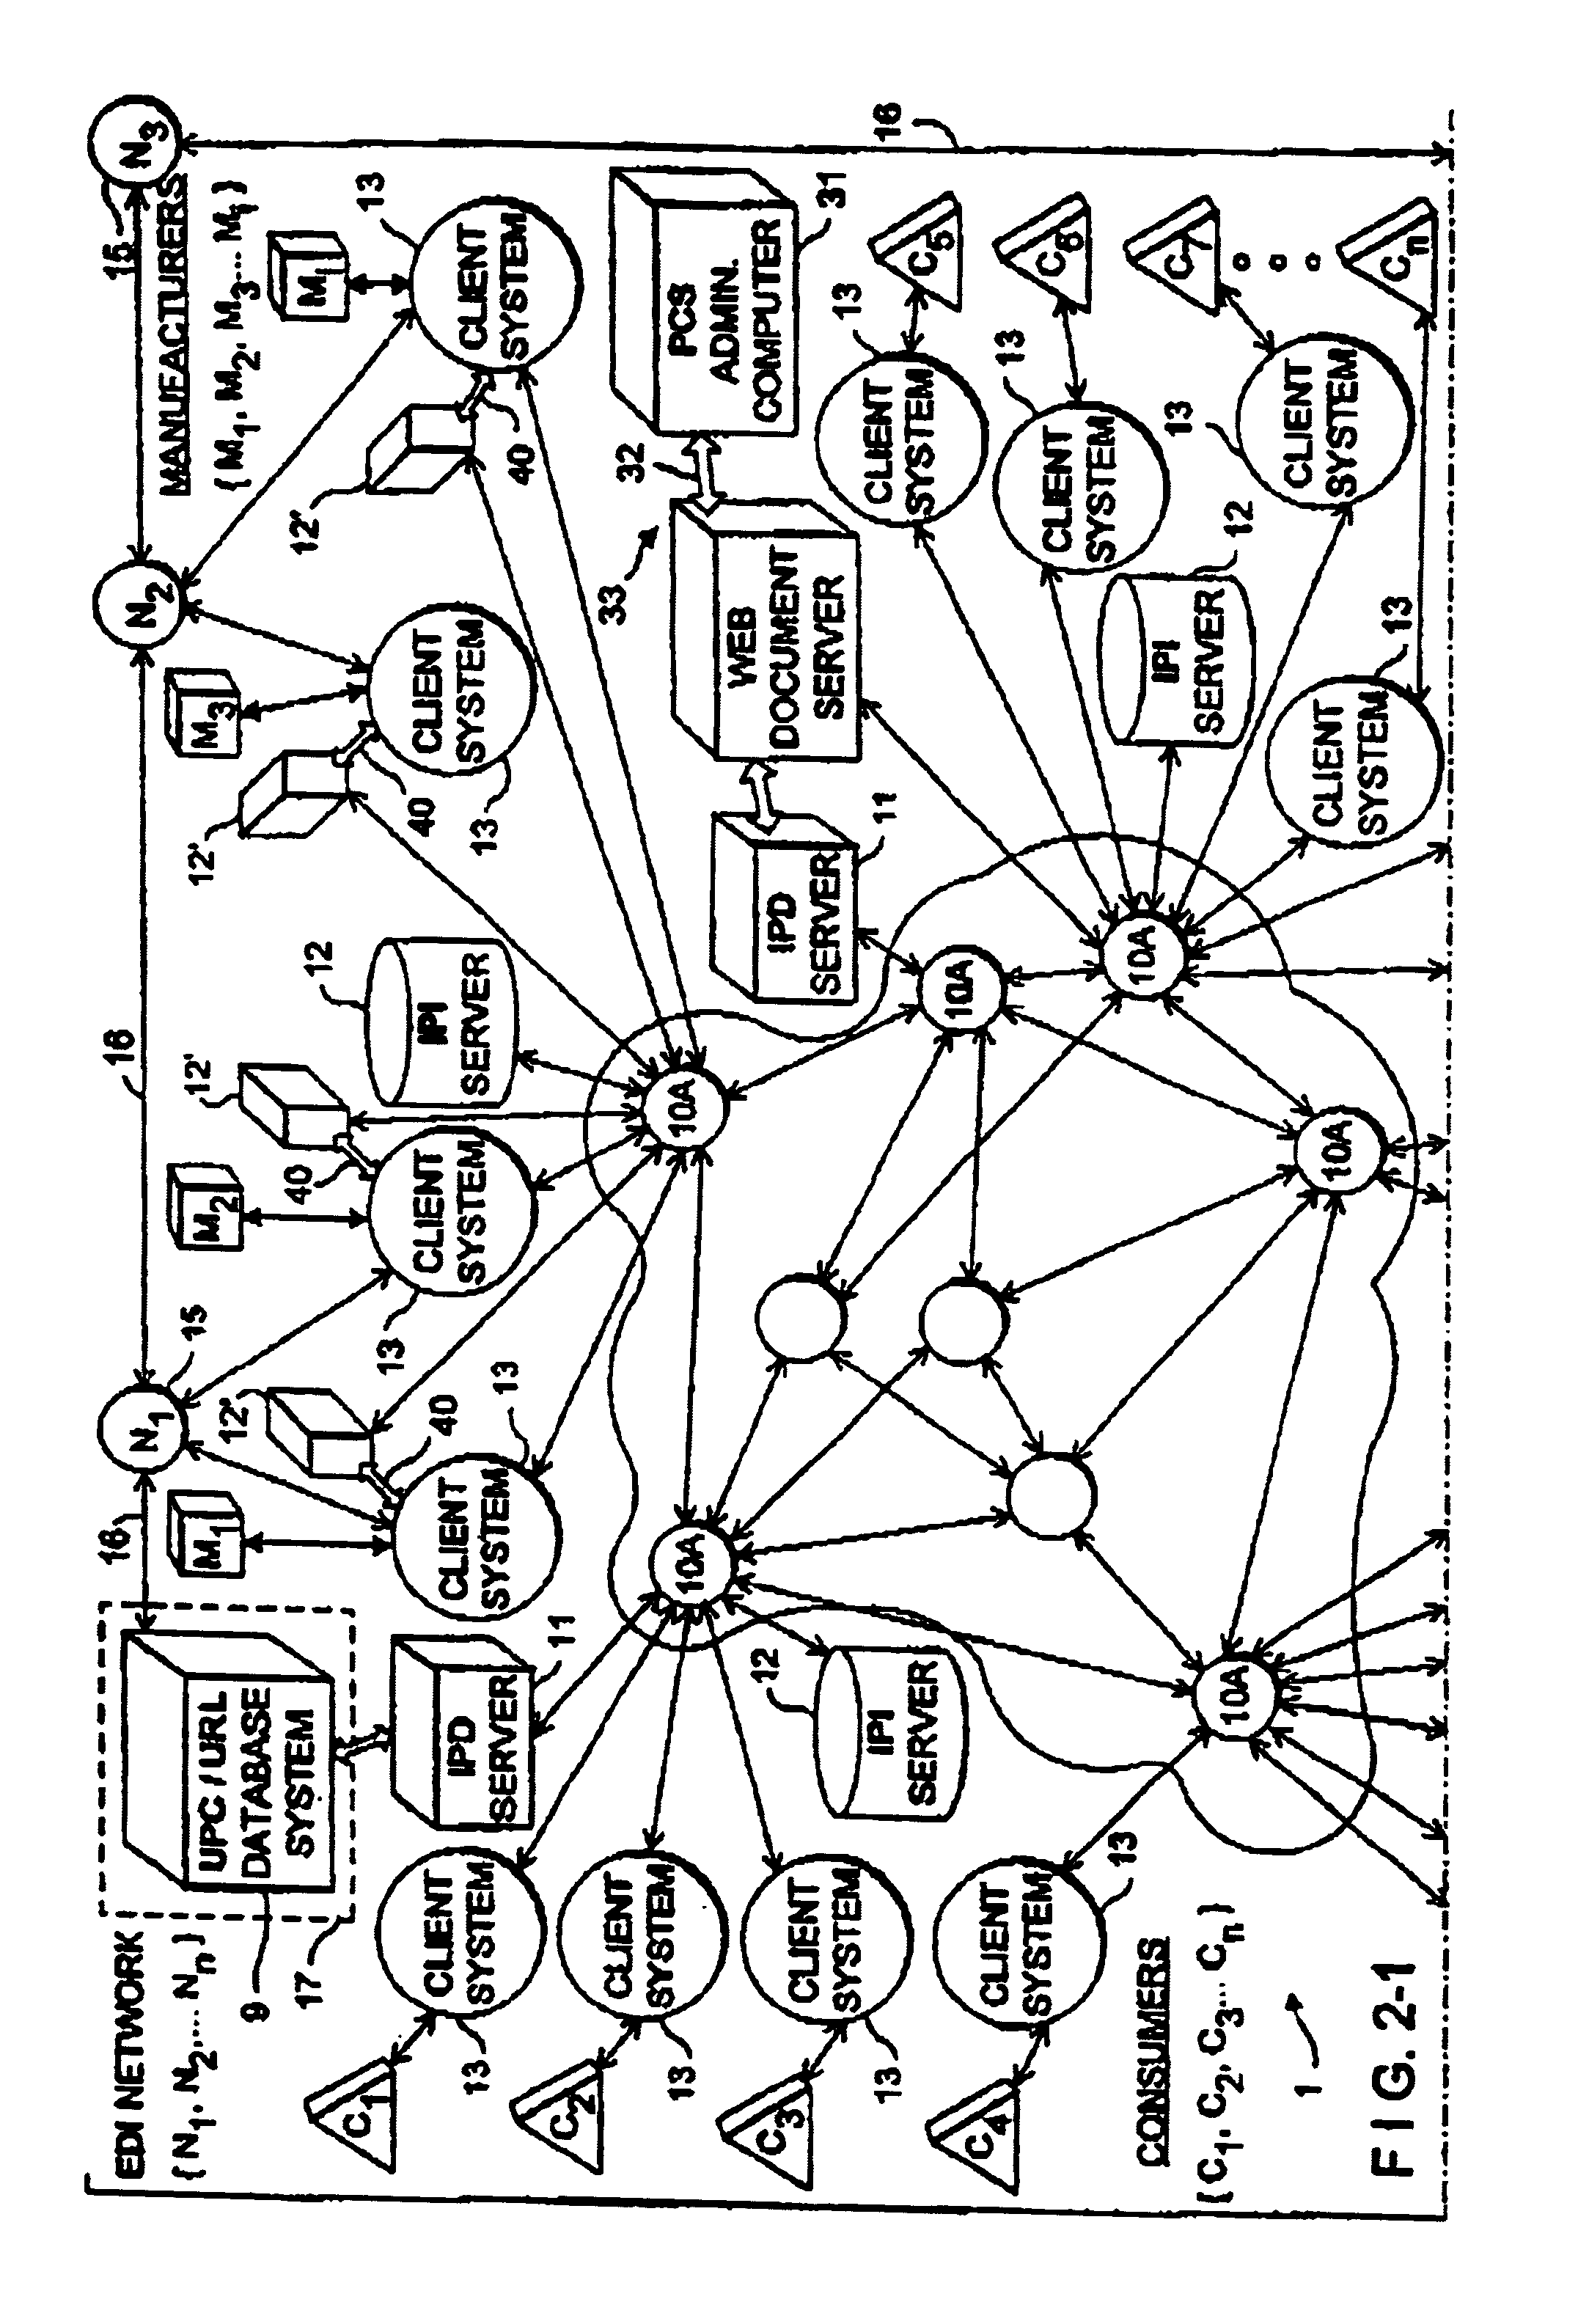 System for and method of managing and delivering manufacturer-specified consumer product information to consumers in the marketplace